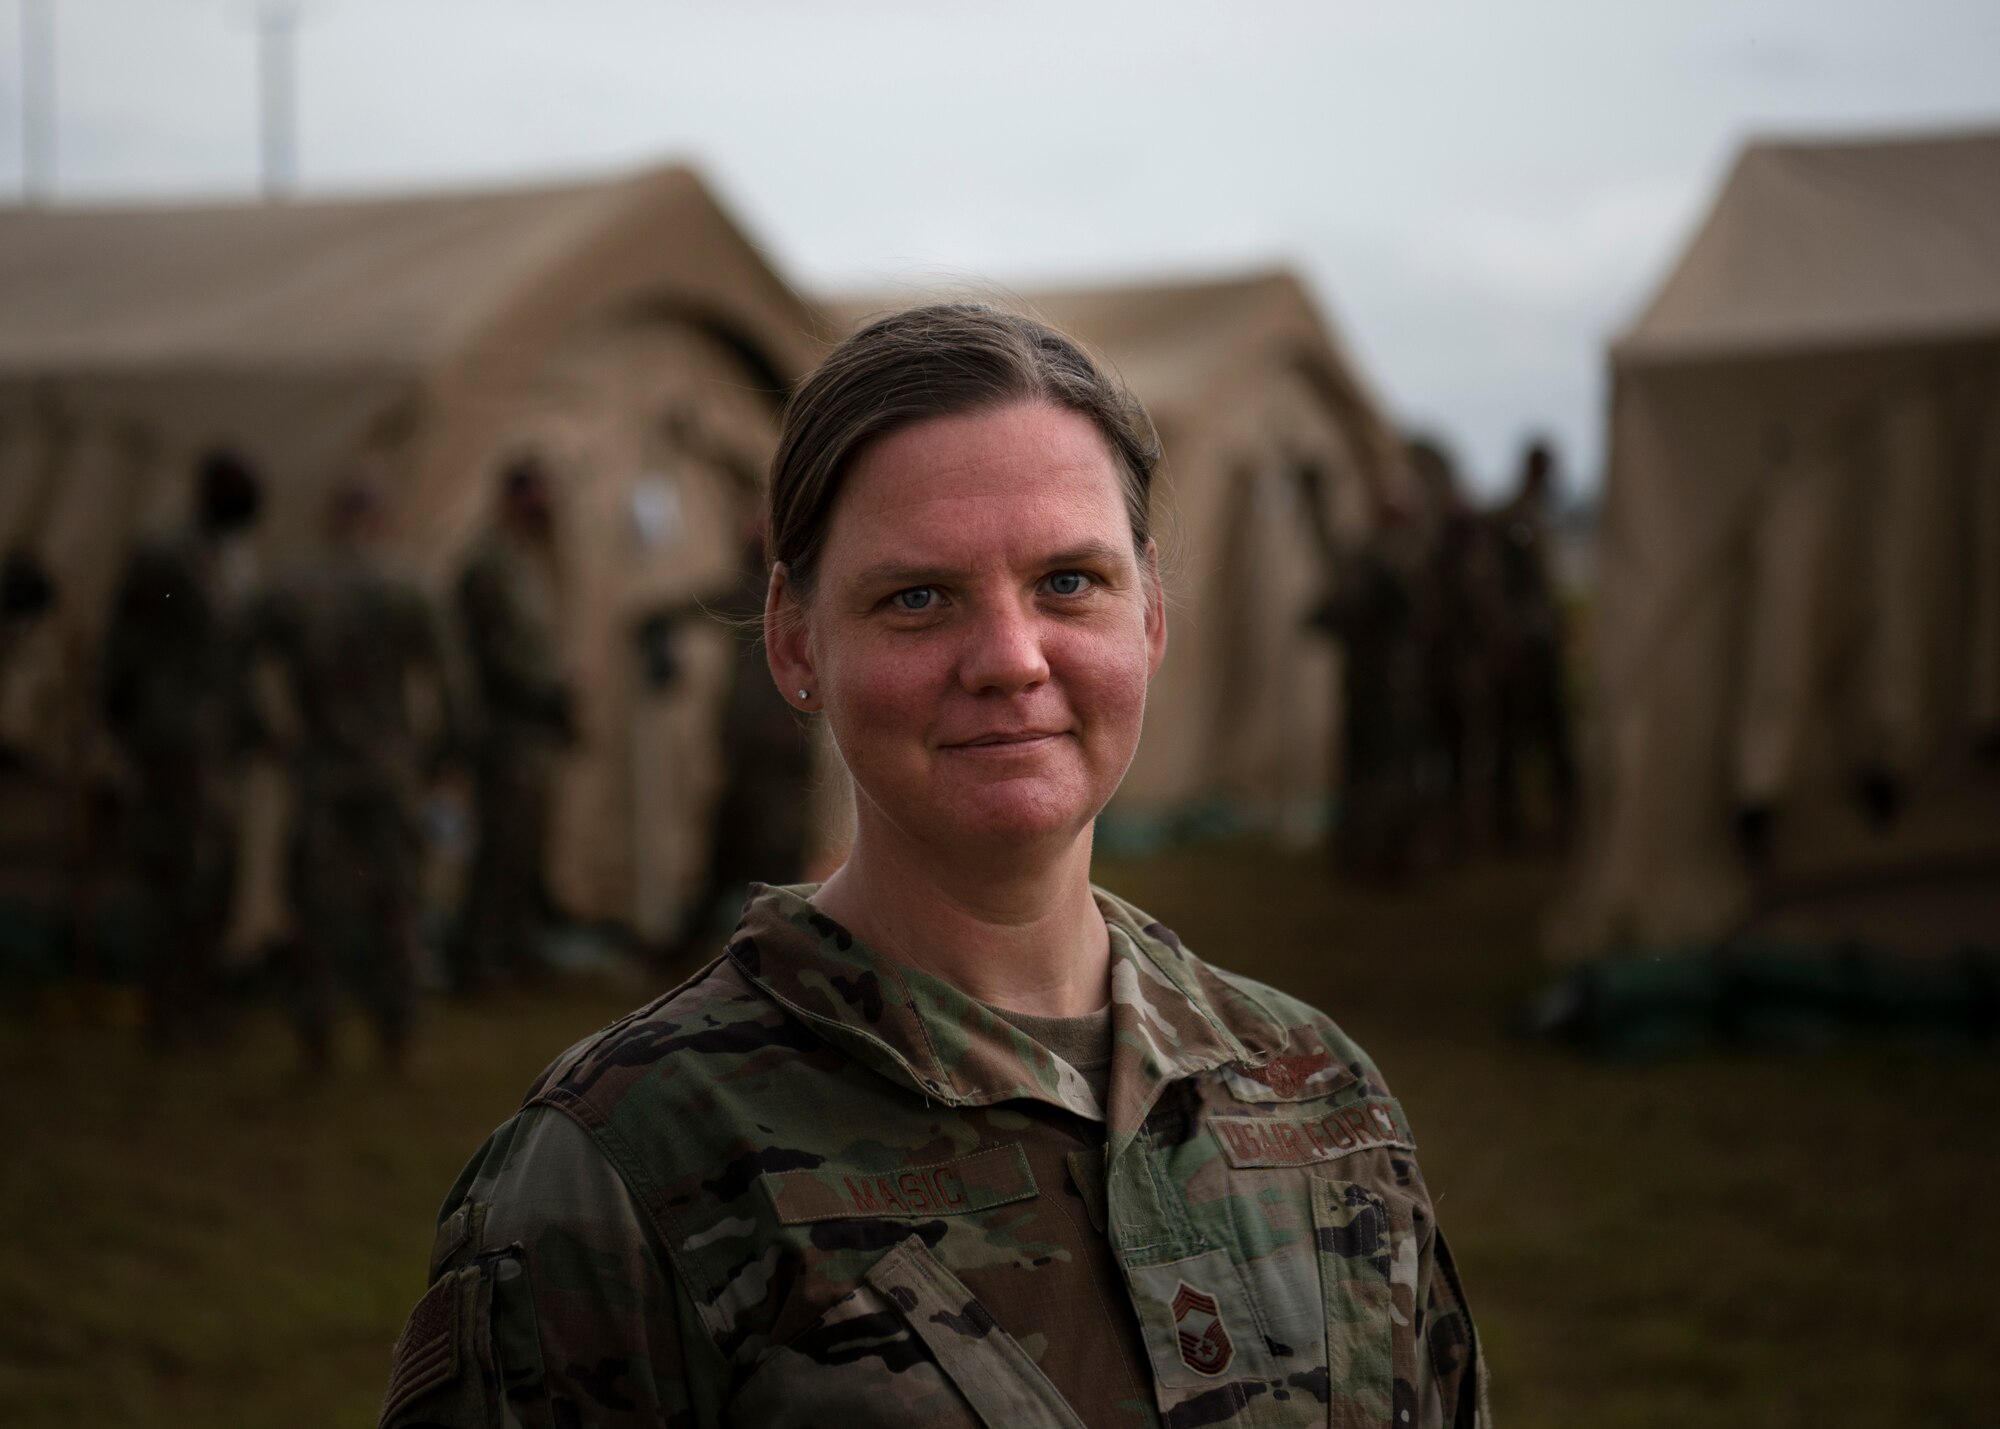 U.S. Air Force Chief Master Sgt. Emily Masic, 366th Fighter Wing superintendent, stands in front of the mobile operating base for Agile Flag 21-1, at Tyndall Air Force Base, Florida, Oct. 24, 2020. Masic's role throughout the exercise is tie everyone together in the A-staff to ensure mission success.  When problems arise, she is able to connect Airman to Airman to expedite the problem solving process. (U.S. Air Force photo by Senior Airman Andrew Kobialka)